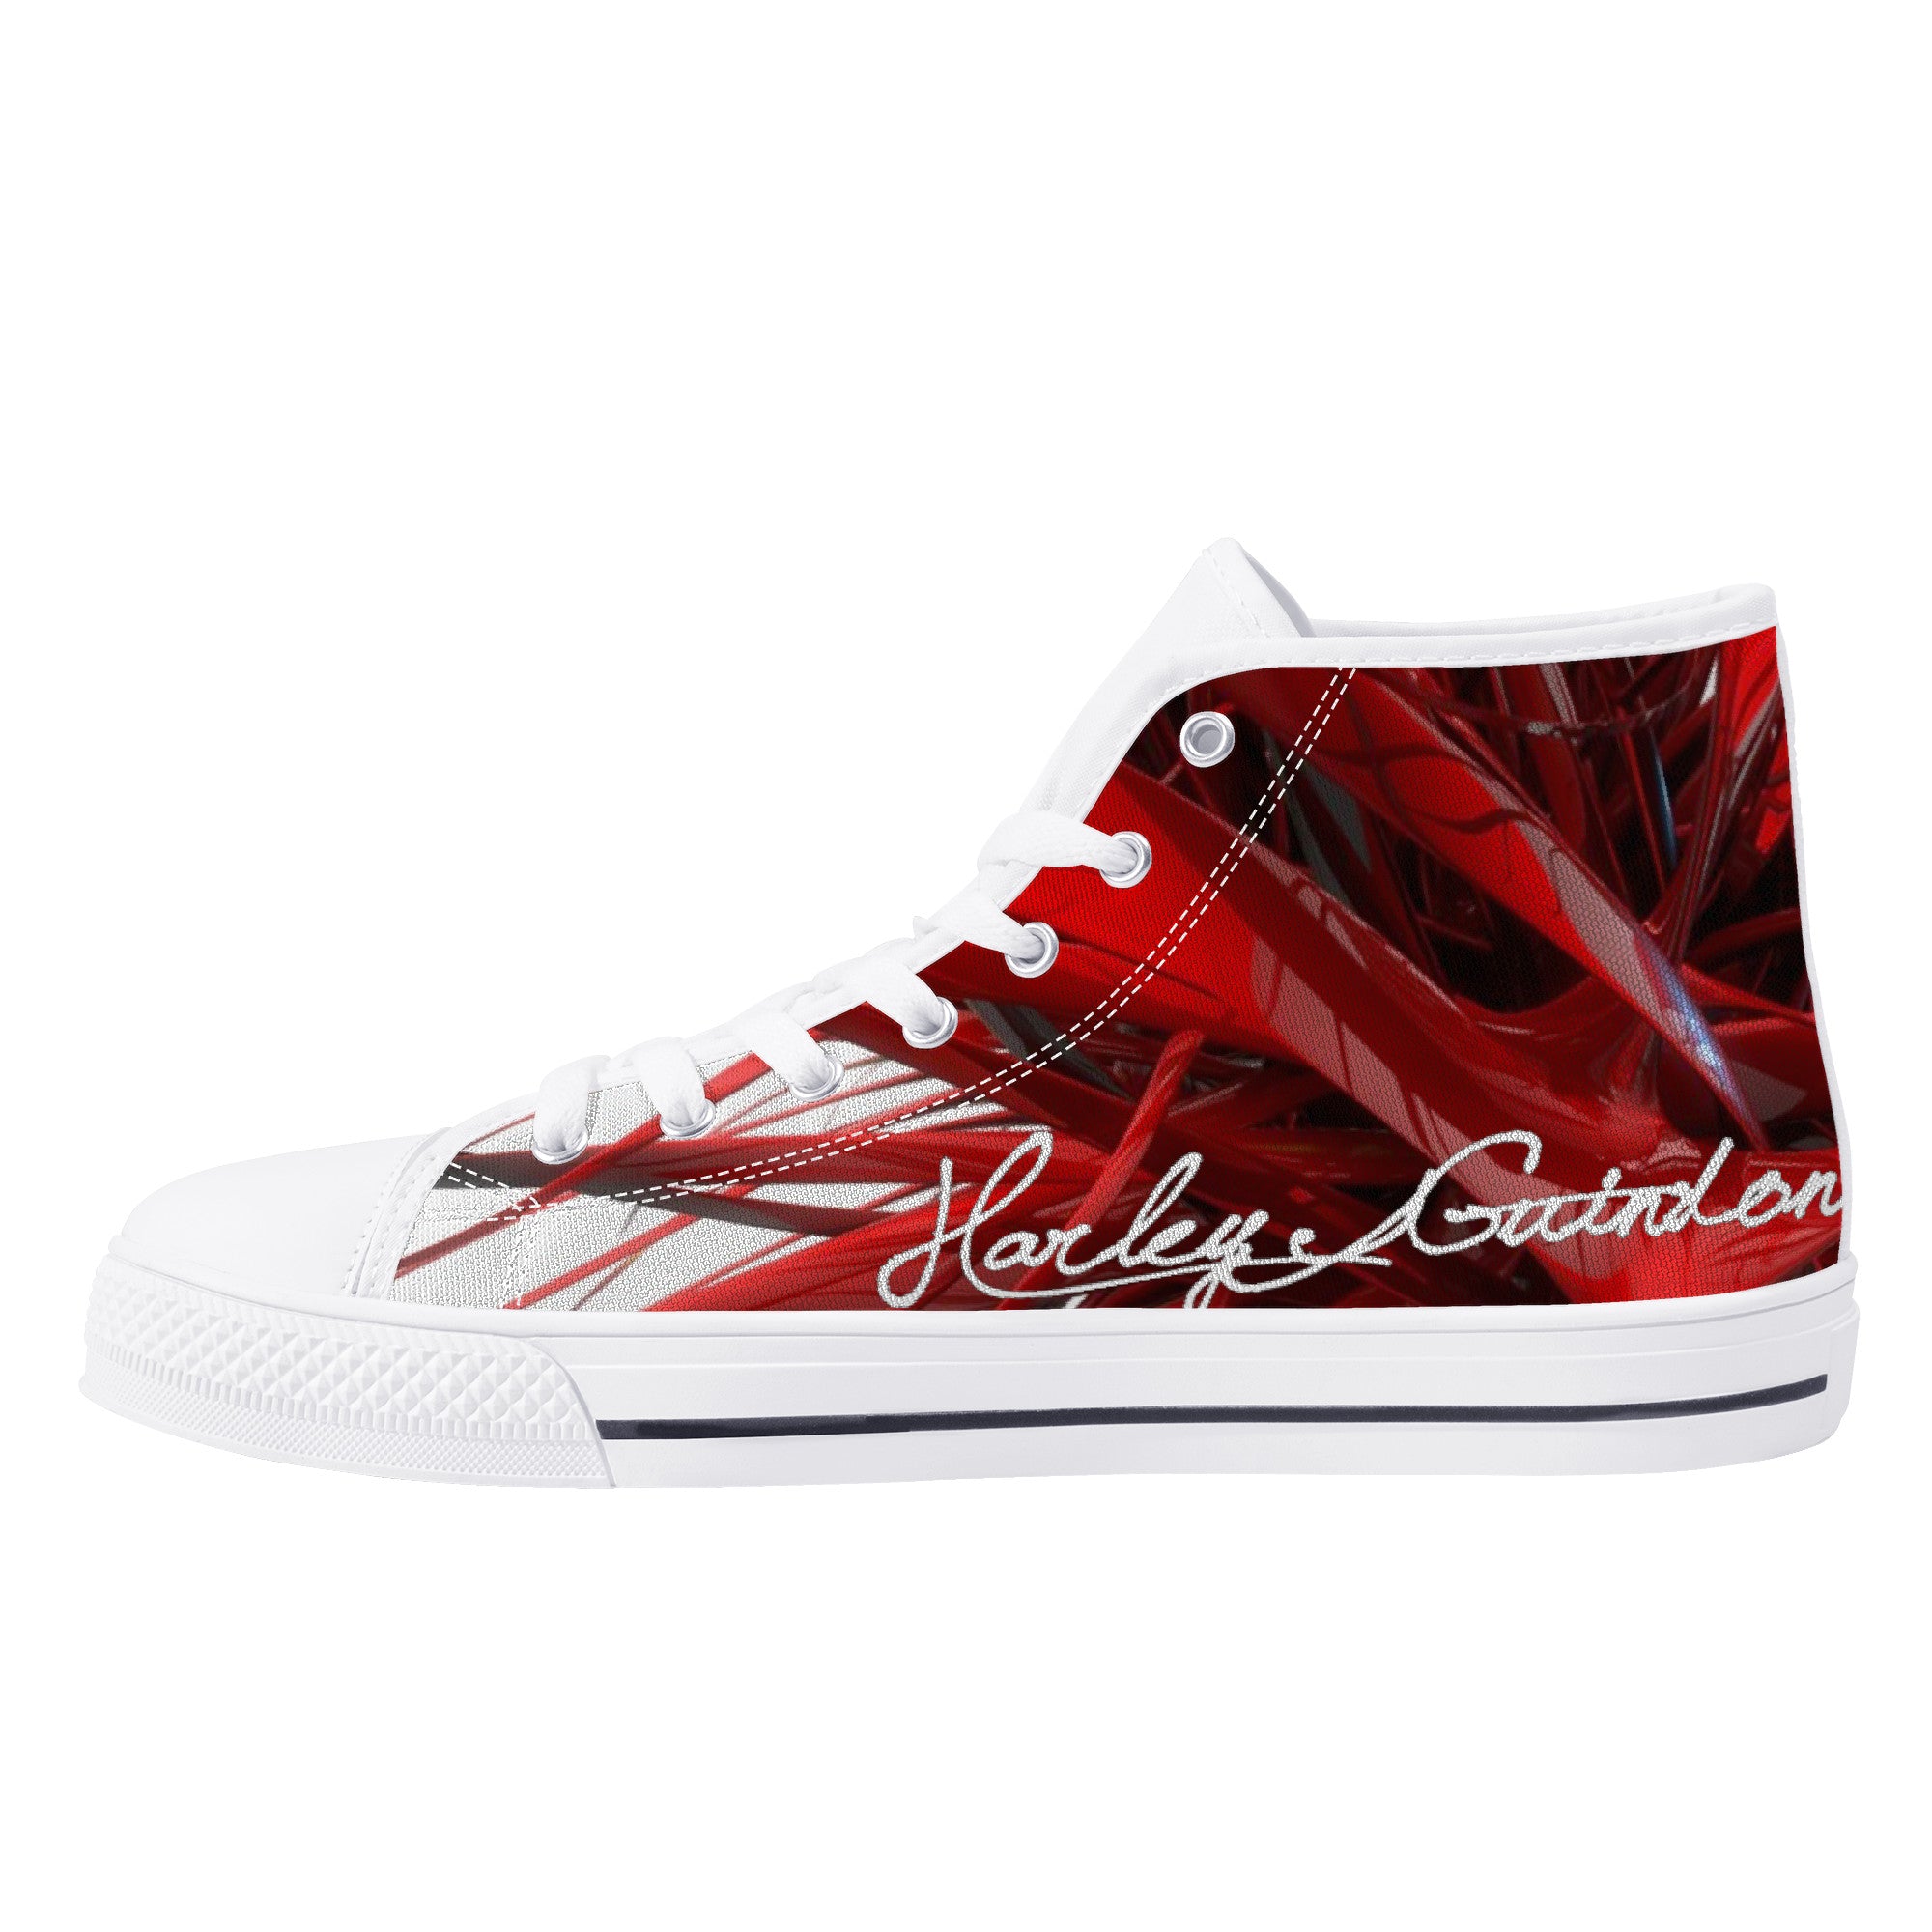 HG Signature Red Shoes | Custom Branded Company Shoes | Shoe Zero